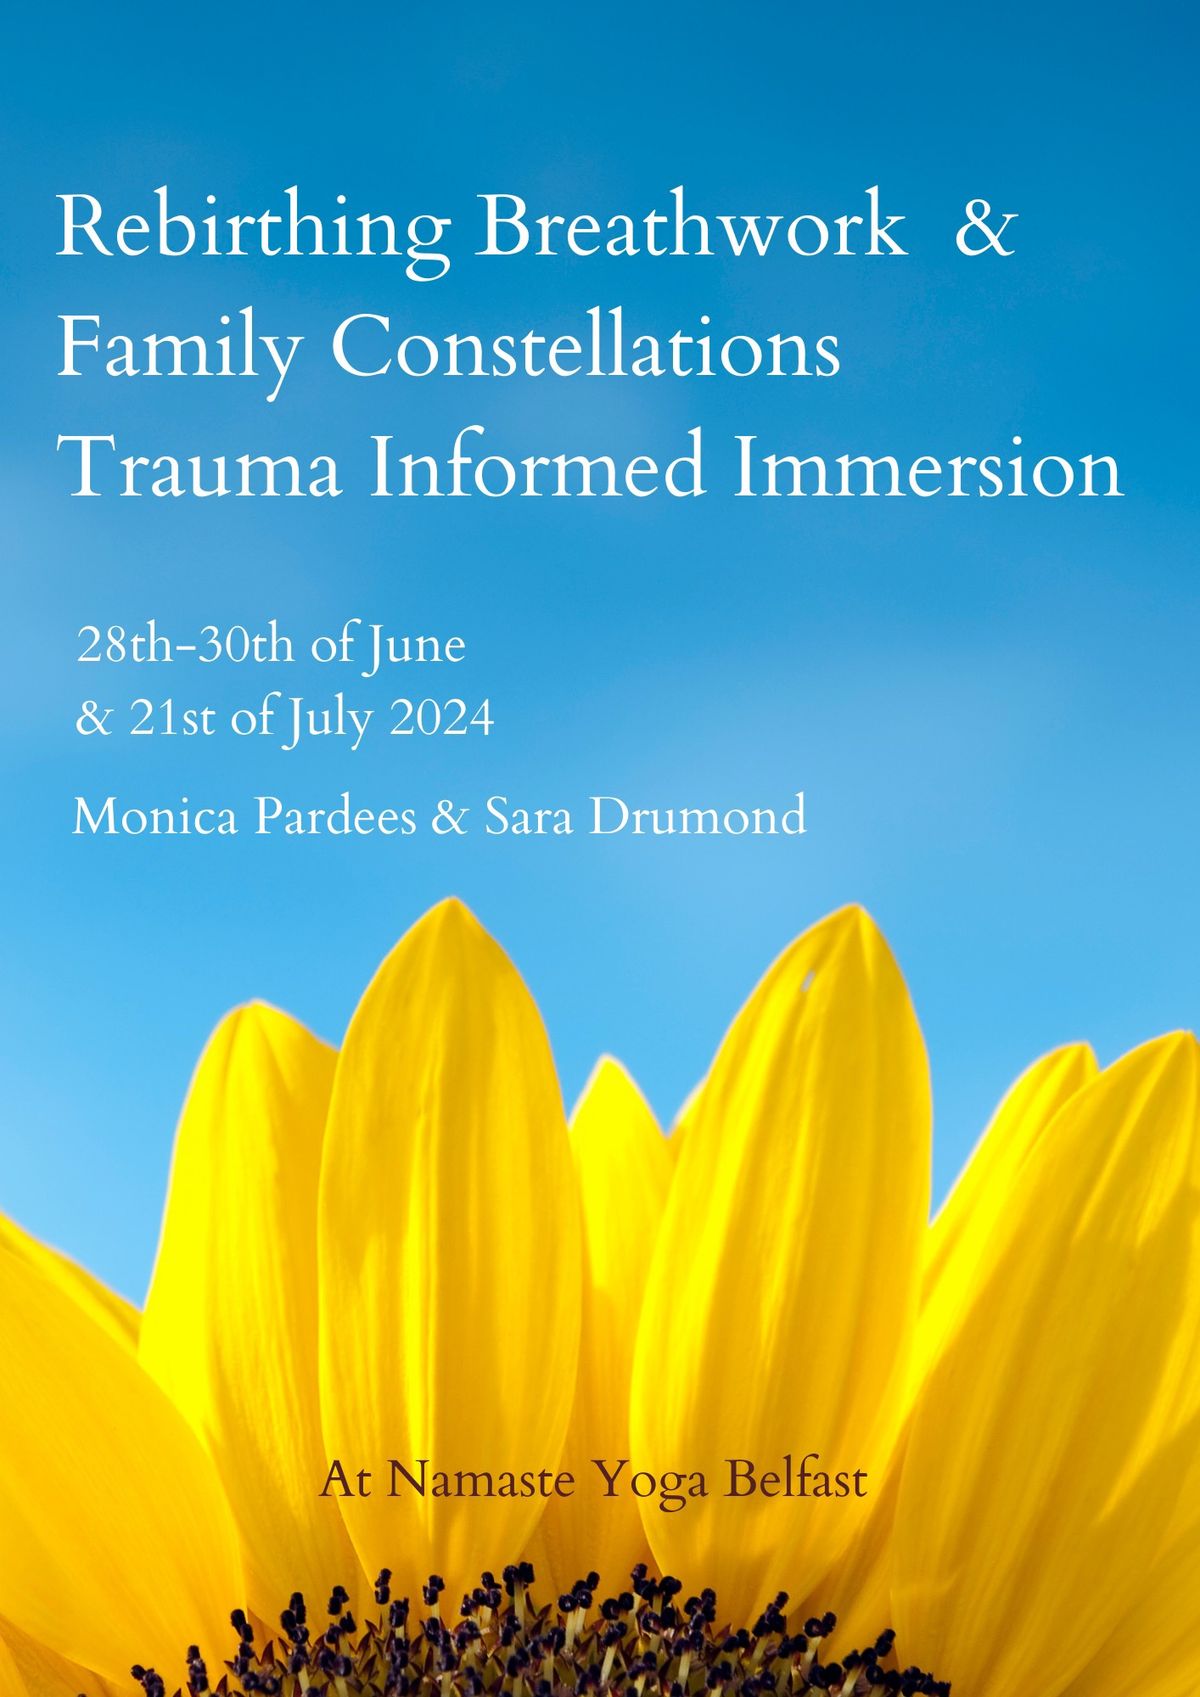 Rebirthing & Family Constellations Immersion 